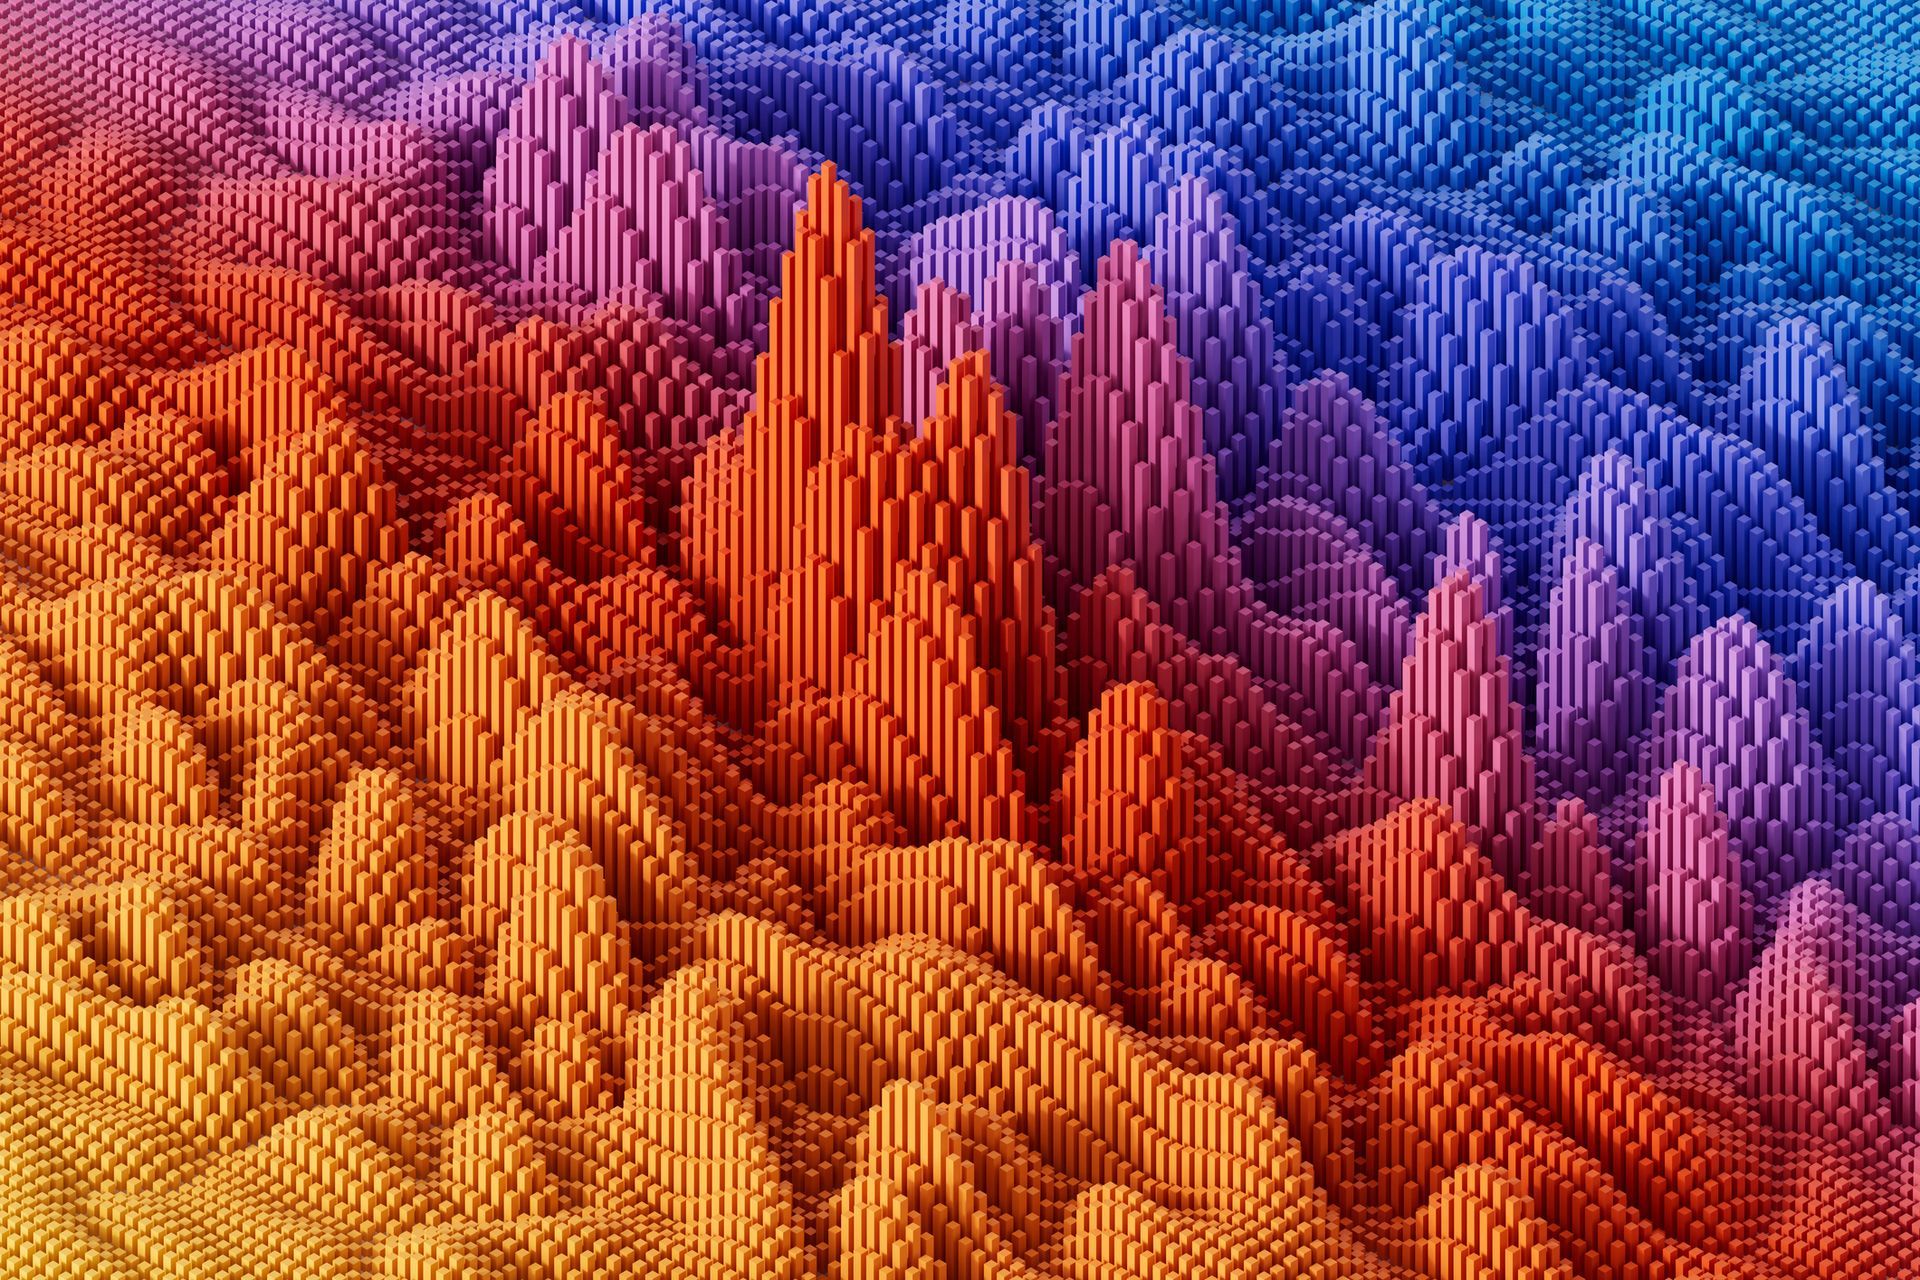 A Computer-Generated Image of A Colorful Mountain Range - Team Office Technologies - Youngstown, OH